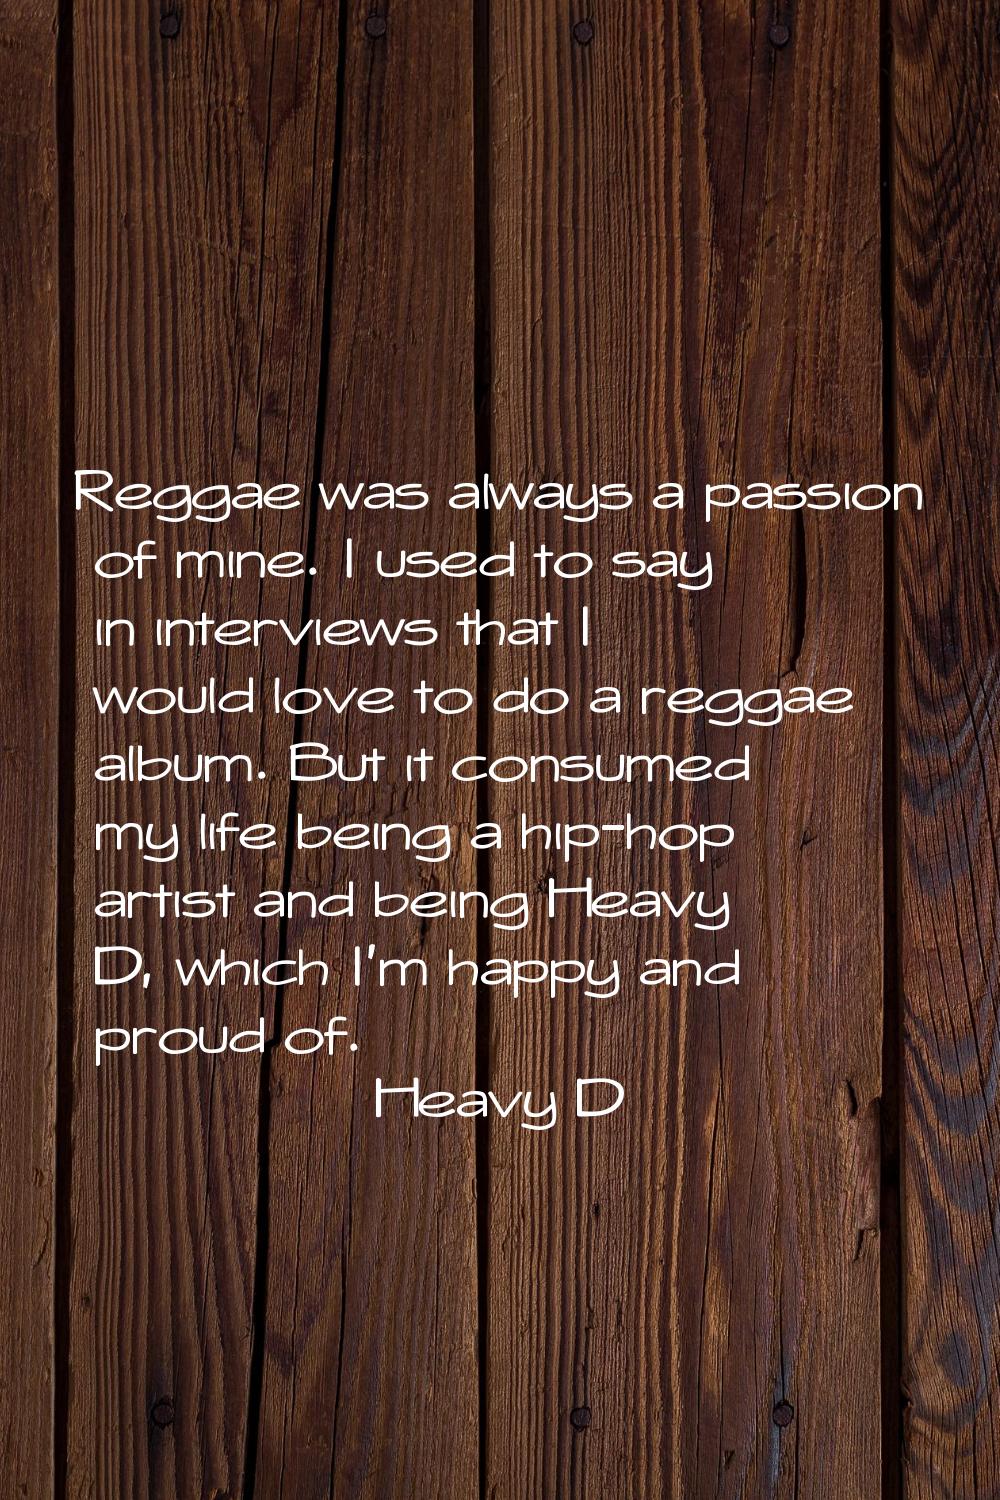 Reggae was always a passion of mine. I used to say in interviews that I would love to do a reggae a